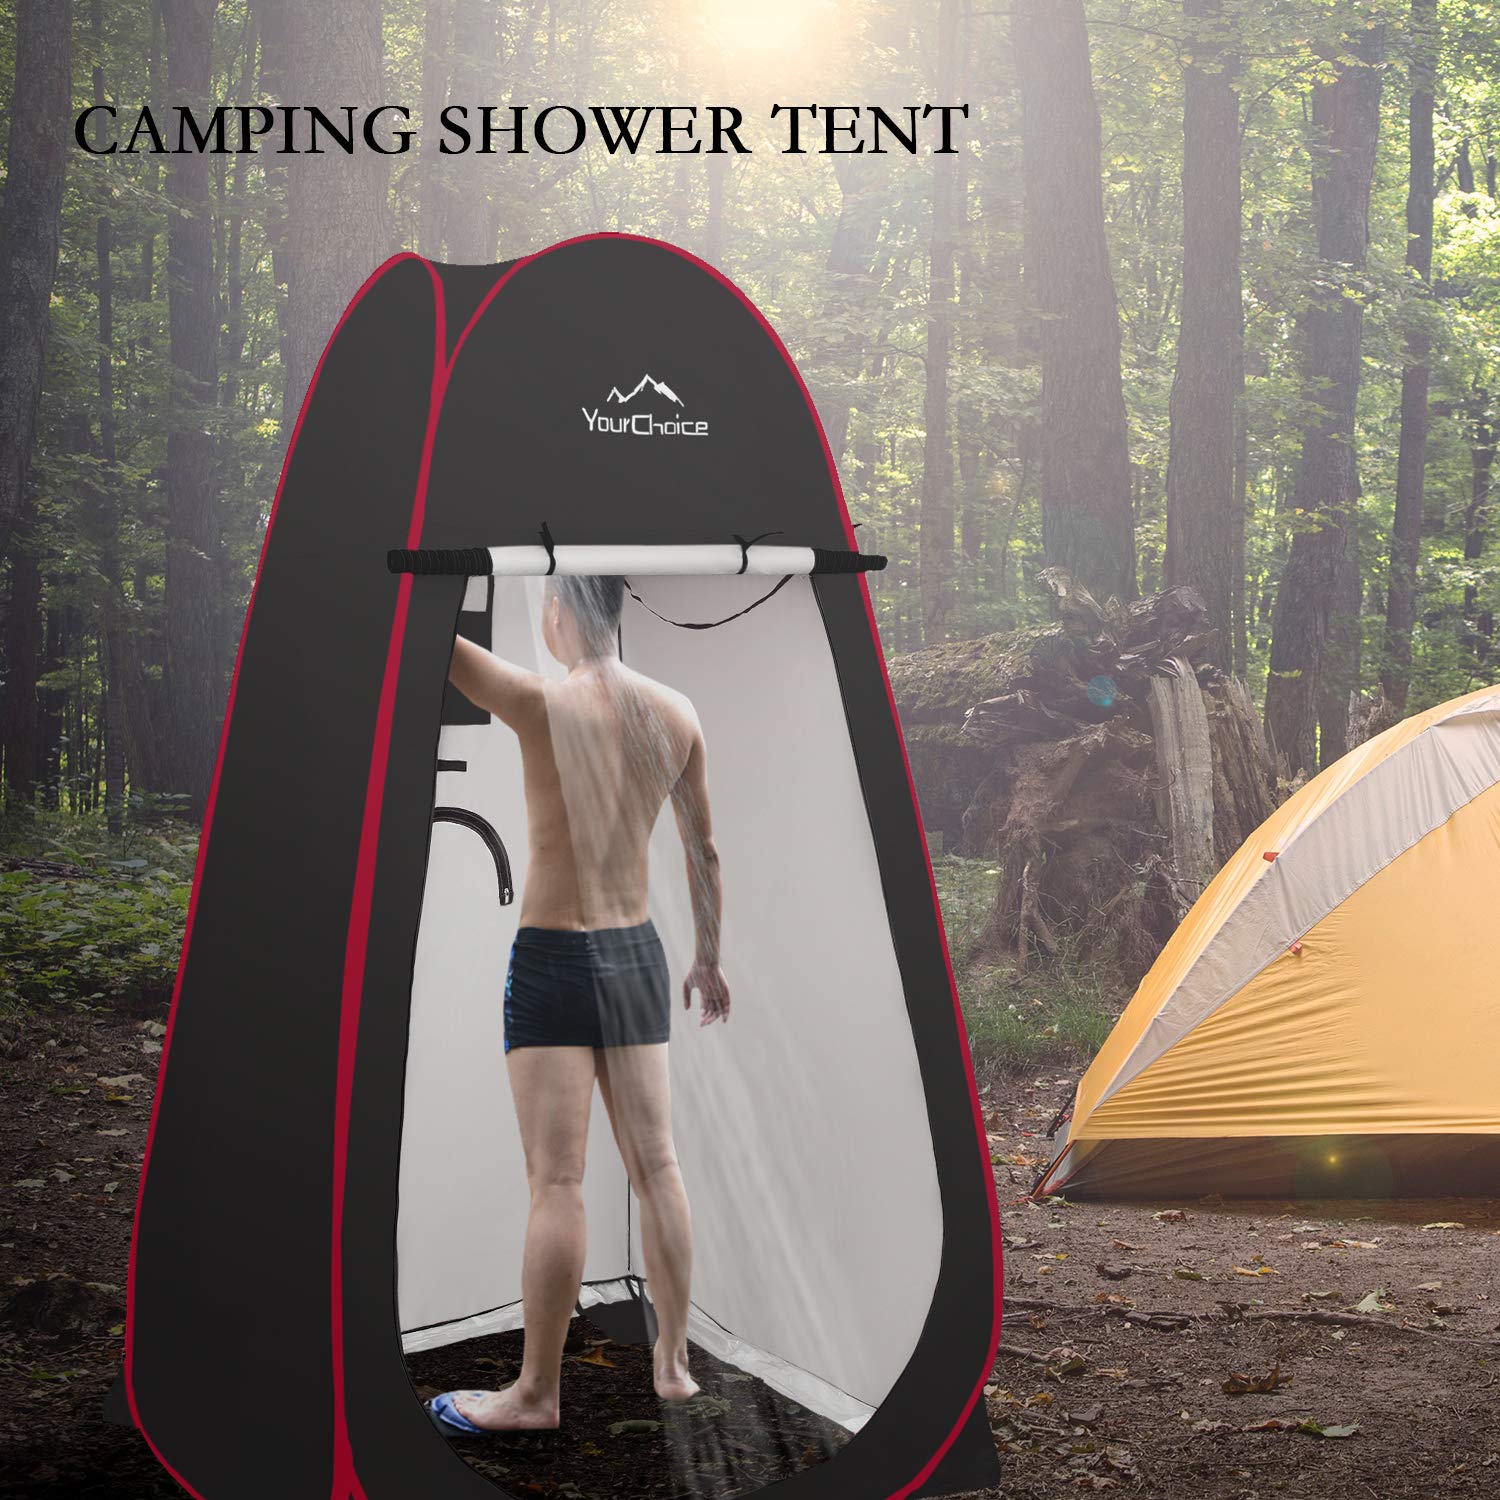 Your Choice Oversized 6.89FT Pop Up Privacy Tent - Camping Shower Changing Tent, Portable Bathroom Toilet Room - Color Black